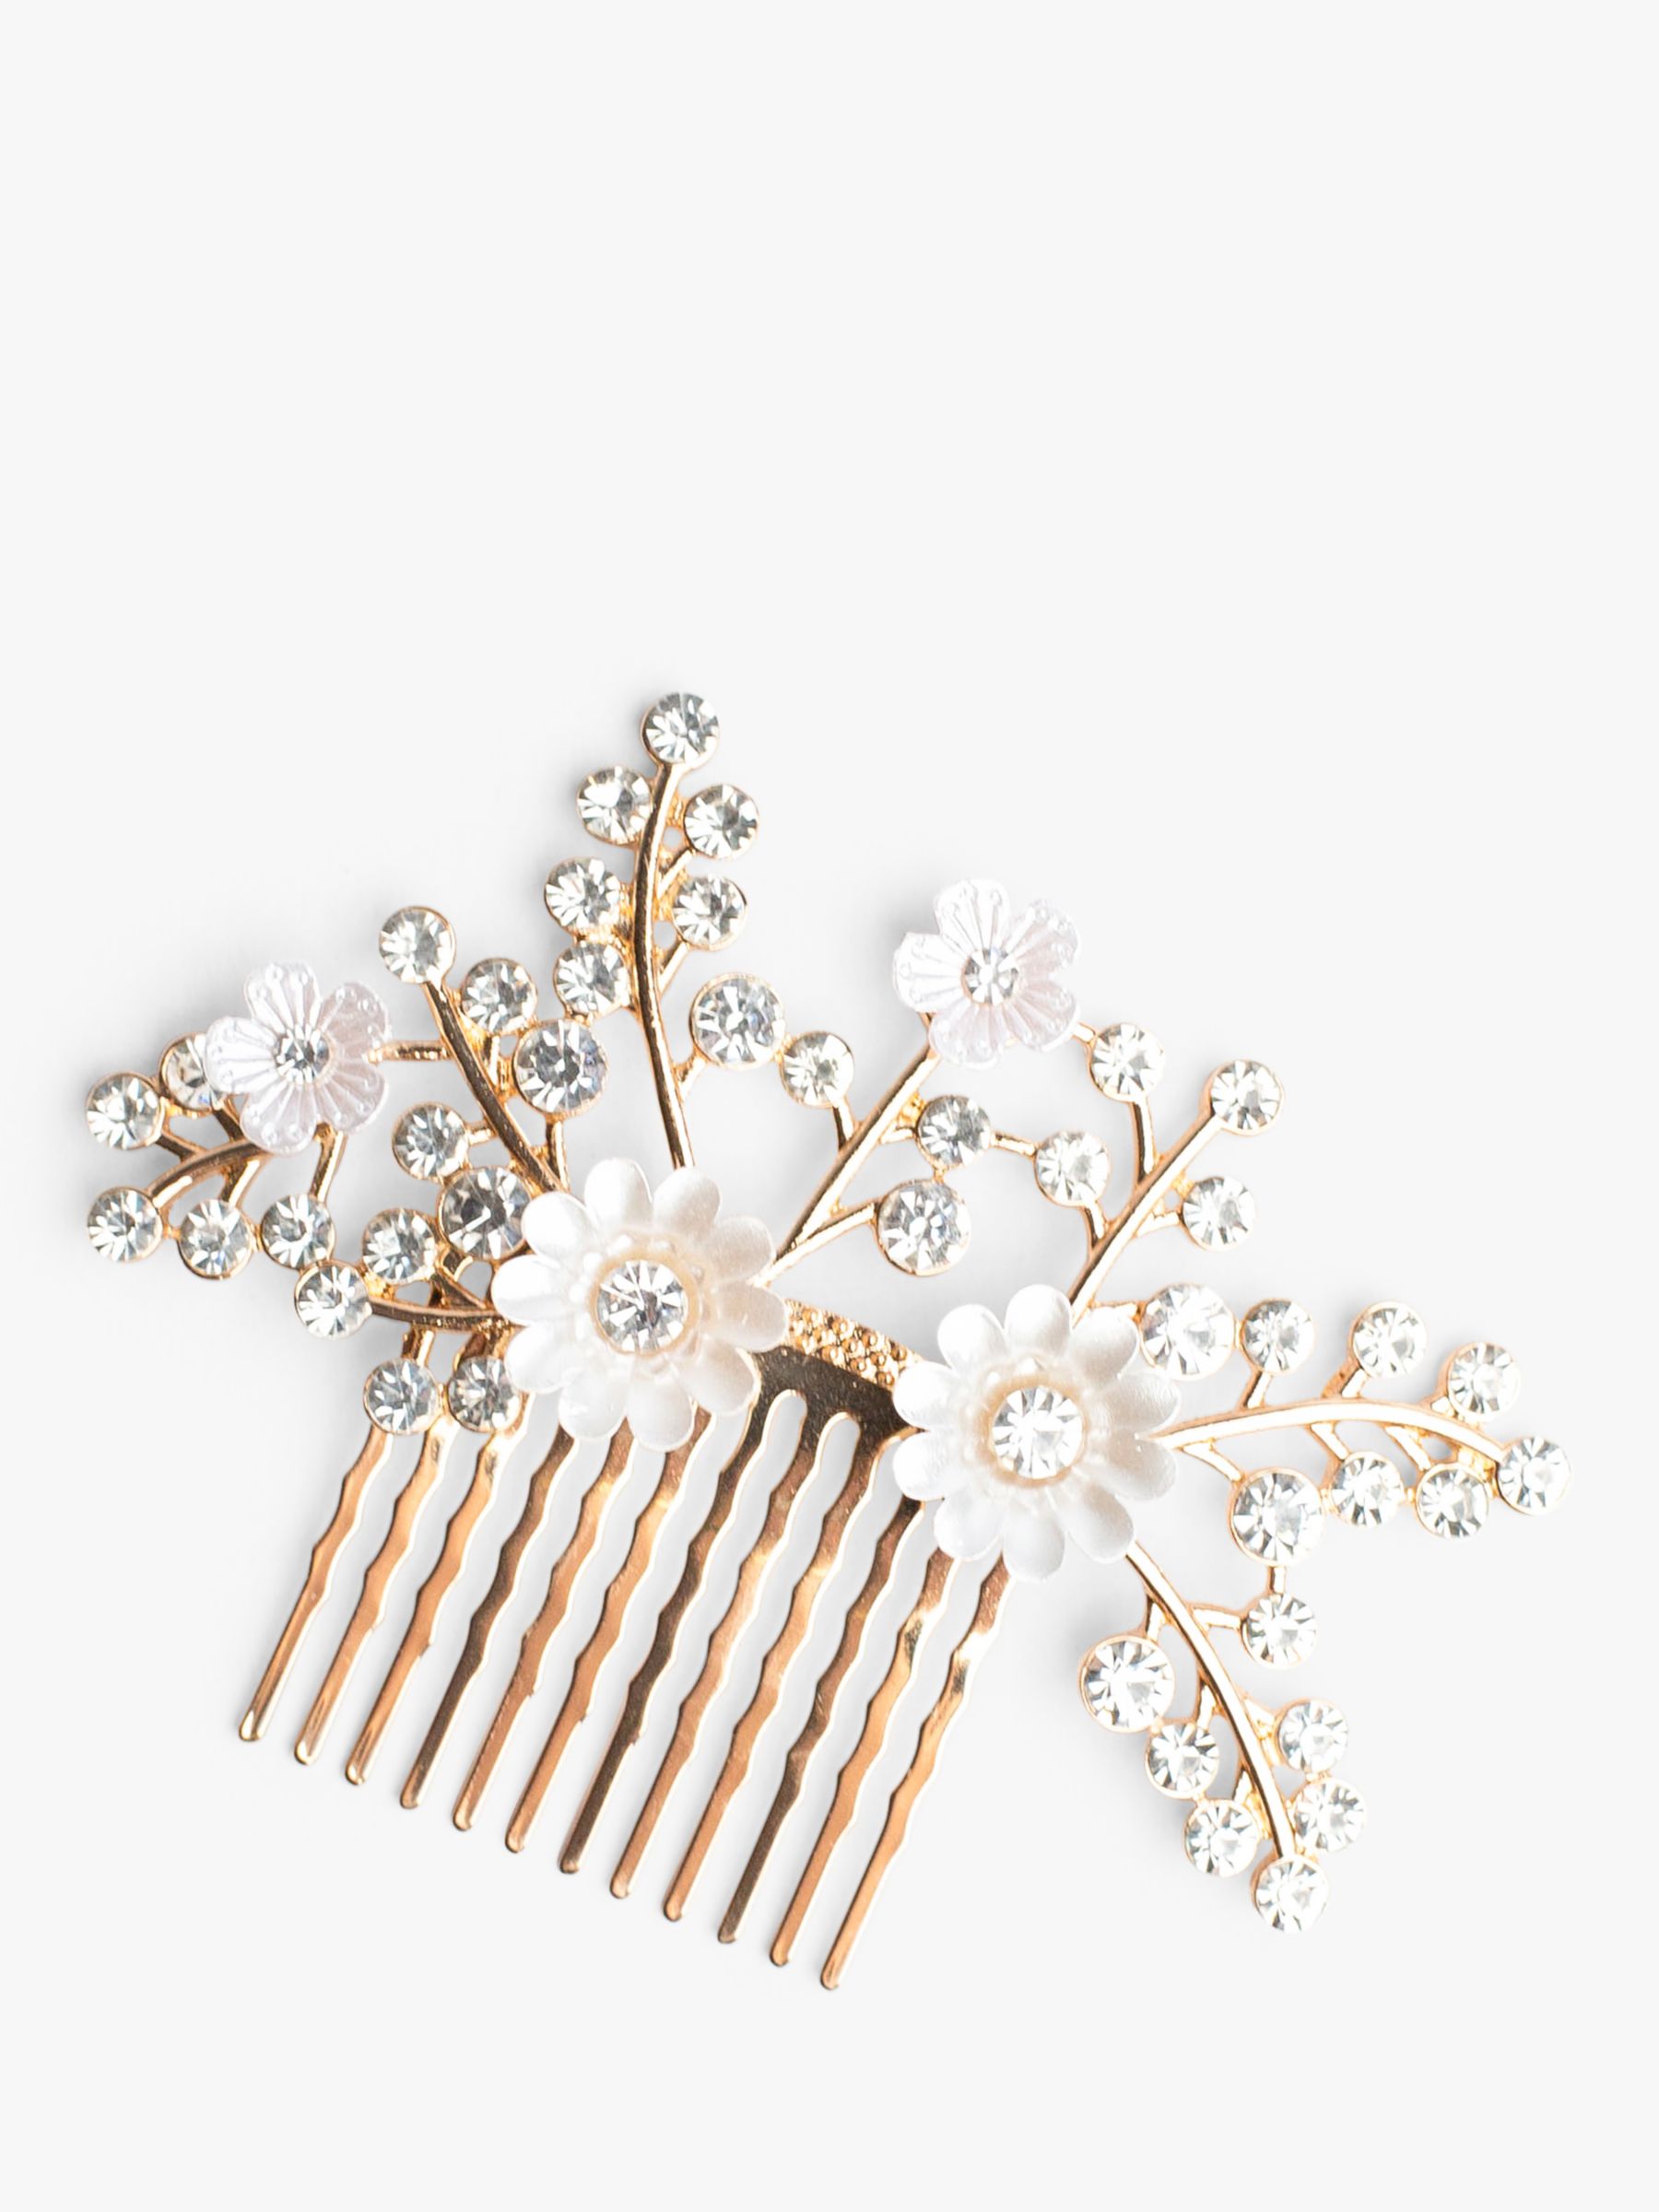 Bloom & Bay Petal Flower Comb, Gold/Cream, One Size